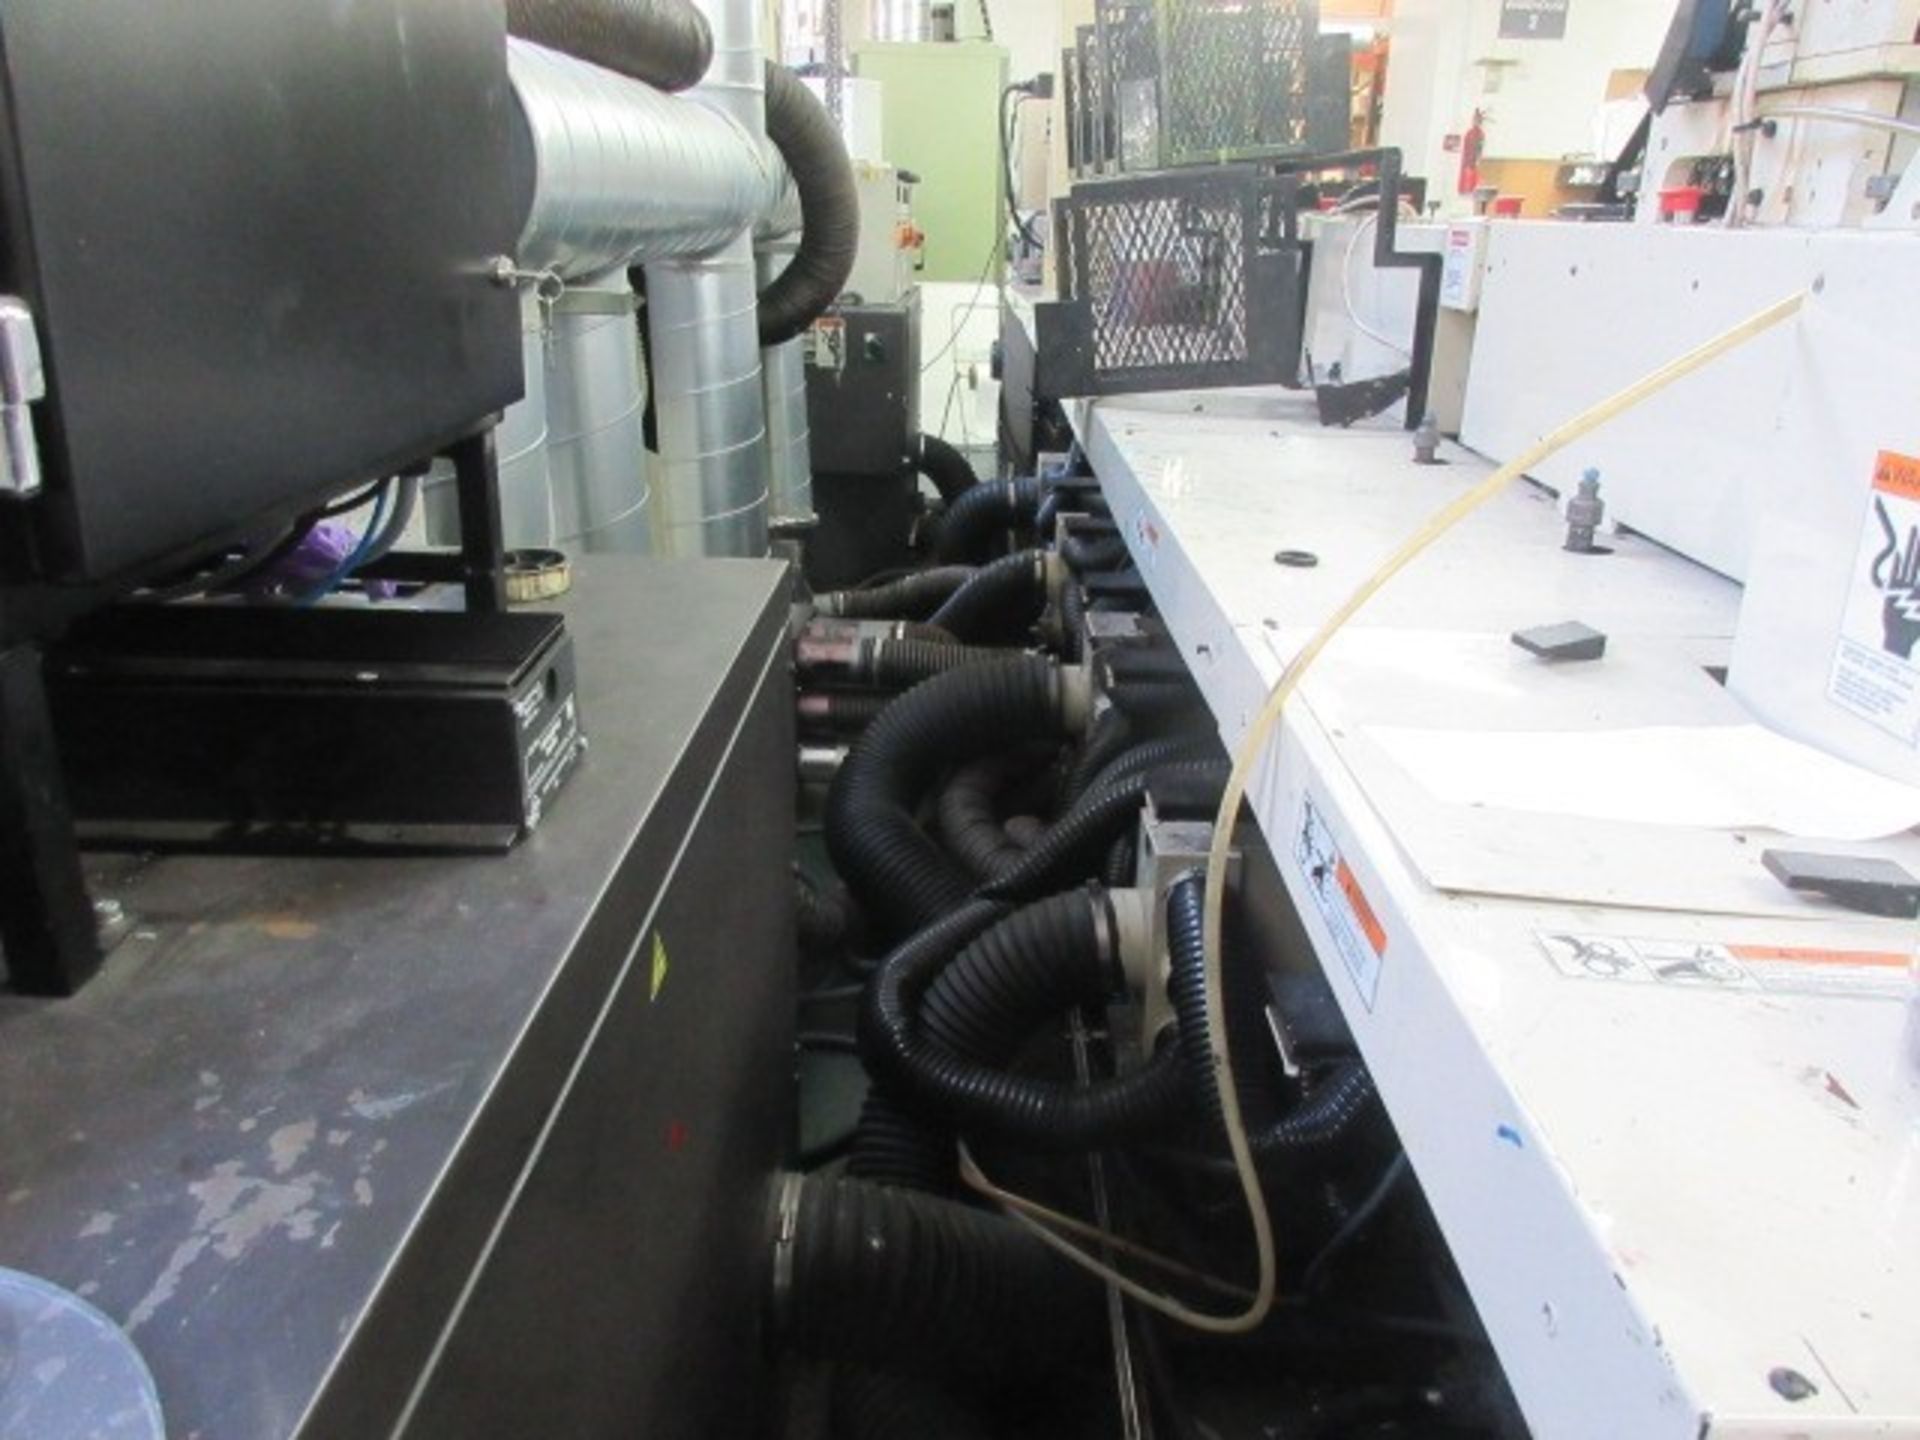 Mark Andy 2200-10F 10” 8 colour flexographic label printing press. Serial no: 1260086 (2002) - Image 302 of 383